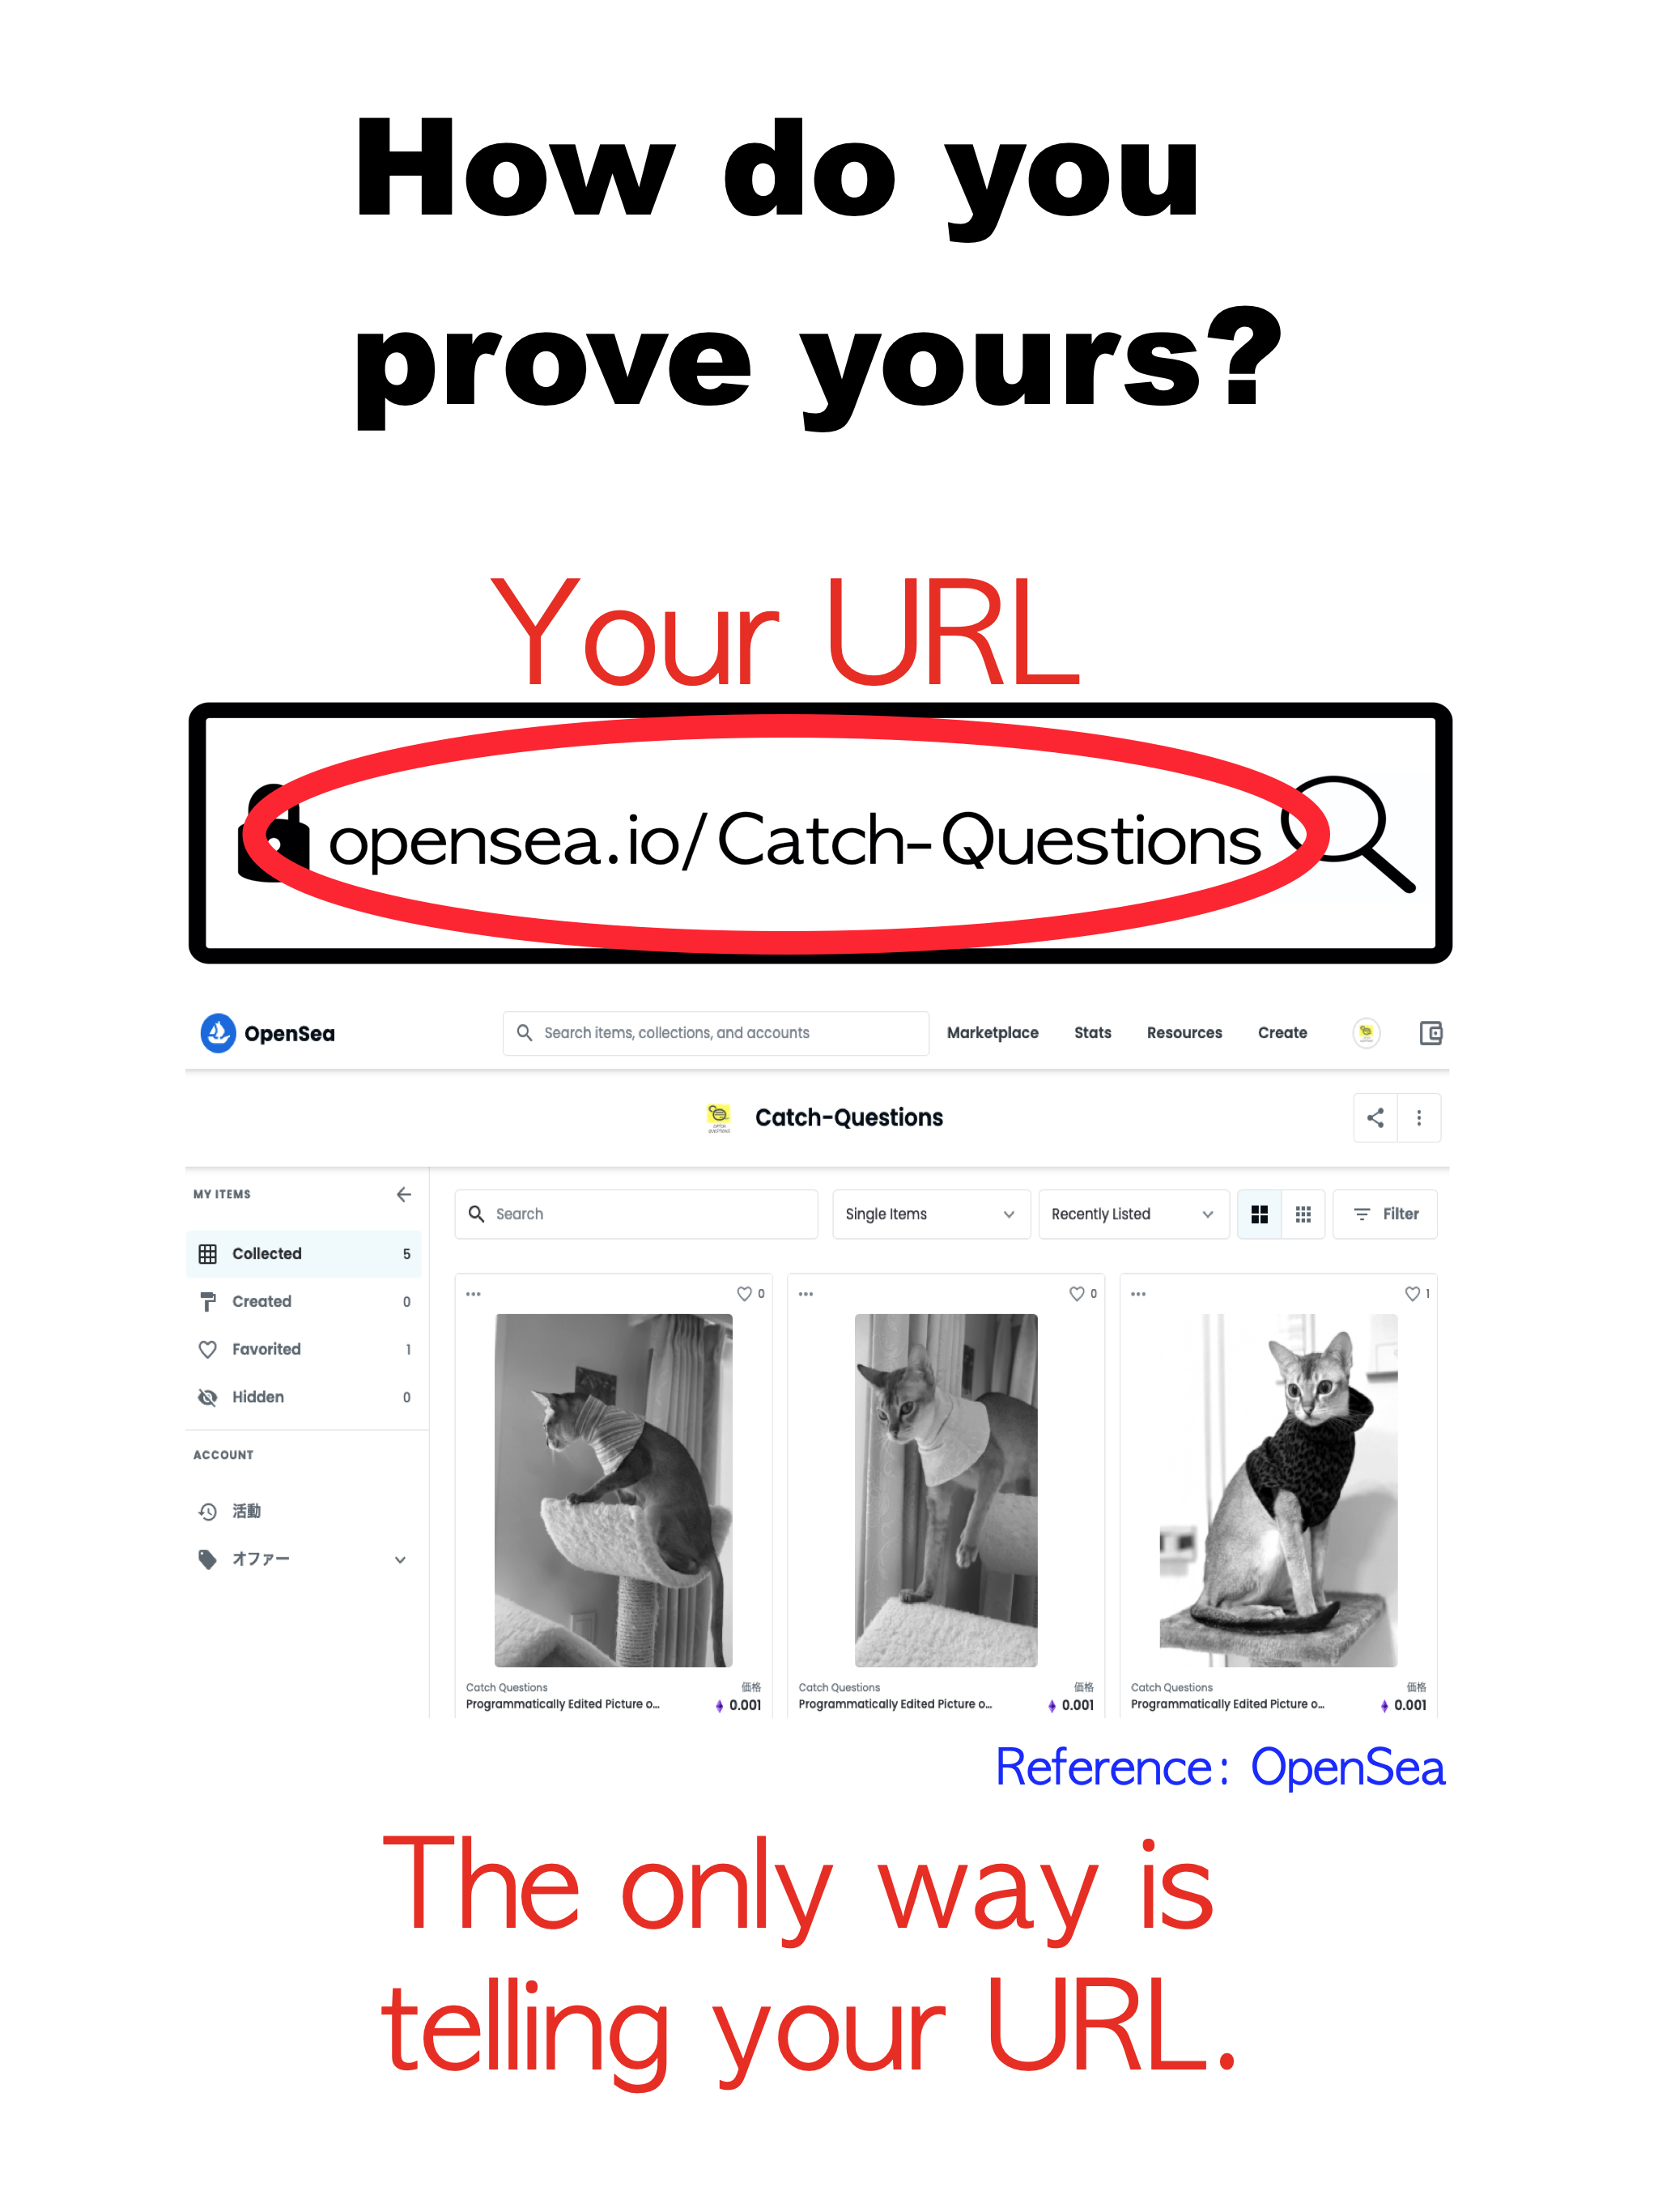 How do you prove yours? The only way is telling your url.